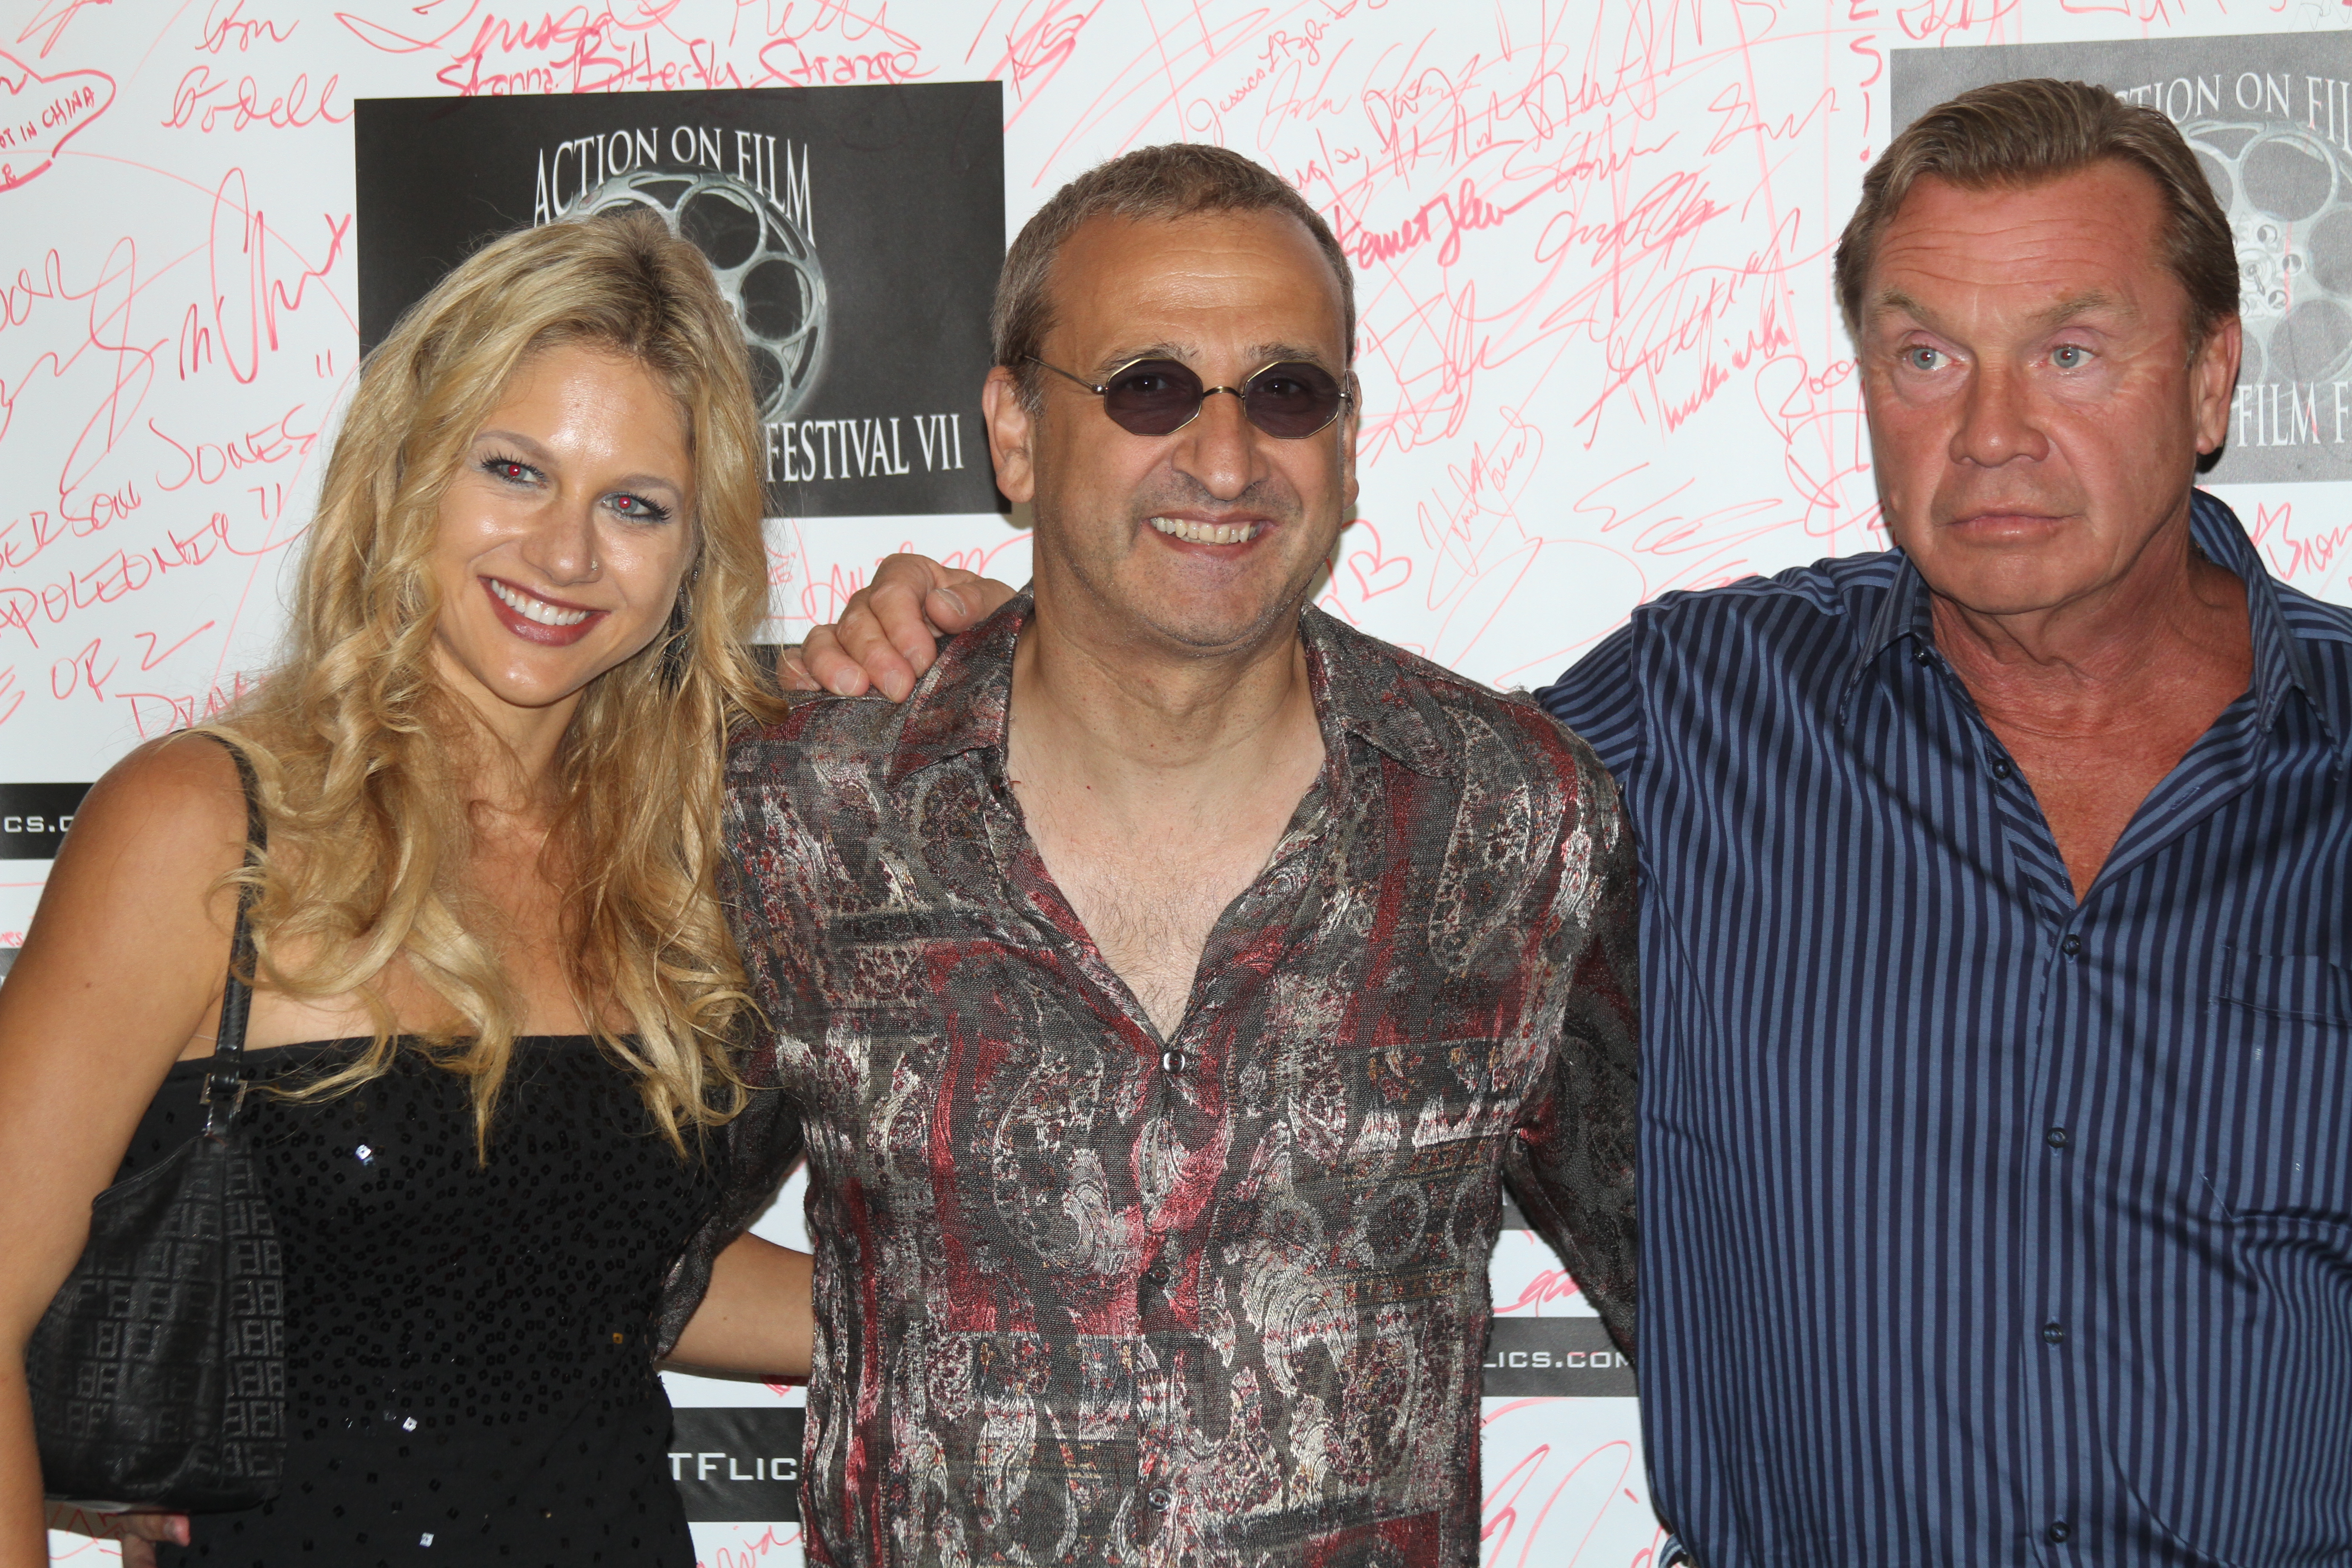 AOF Festival Red Carpet 2012, Perception and Imag-In stars Ursula Maria, Stan Harrington and RD Call